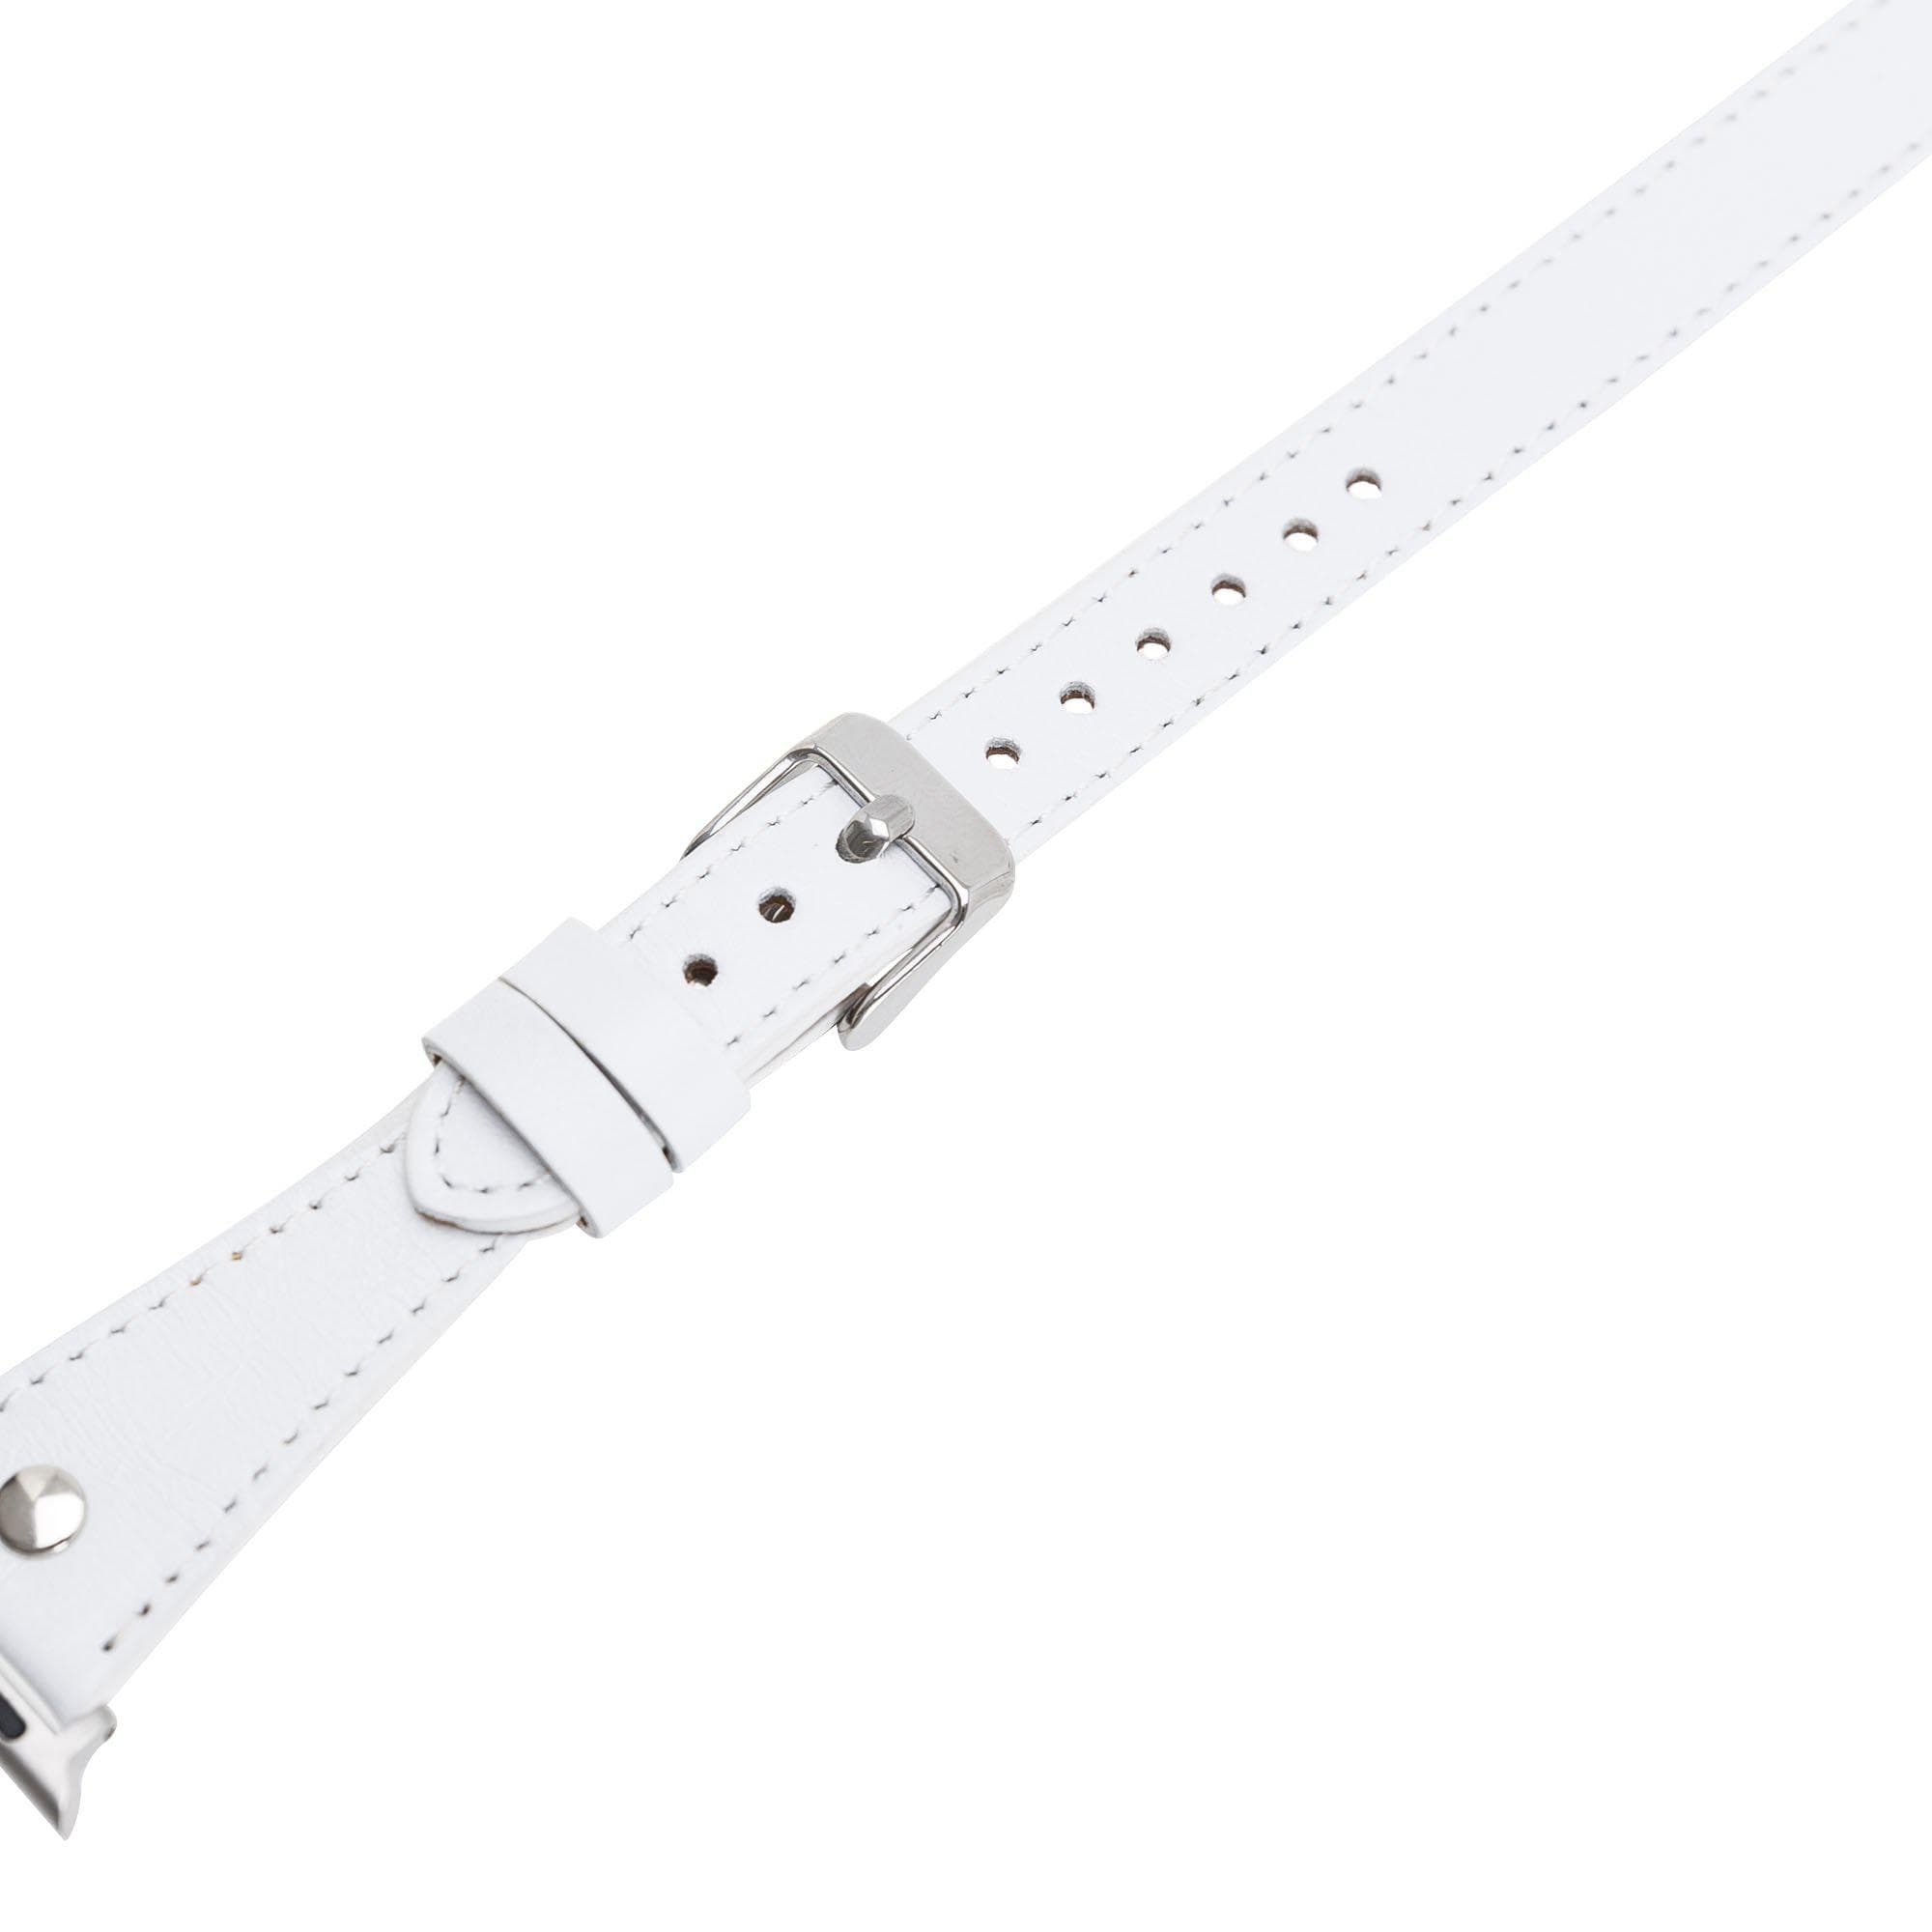 B2B - Leather Apple Watch Bands - DTS Double Tour Slim Hector Silver Trok Style Bouletta B2B